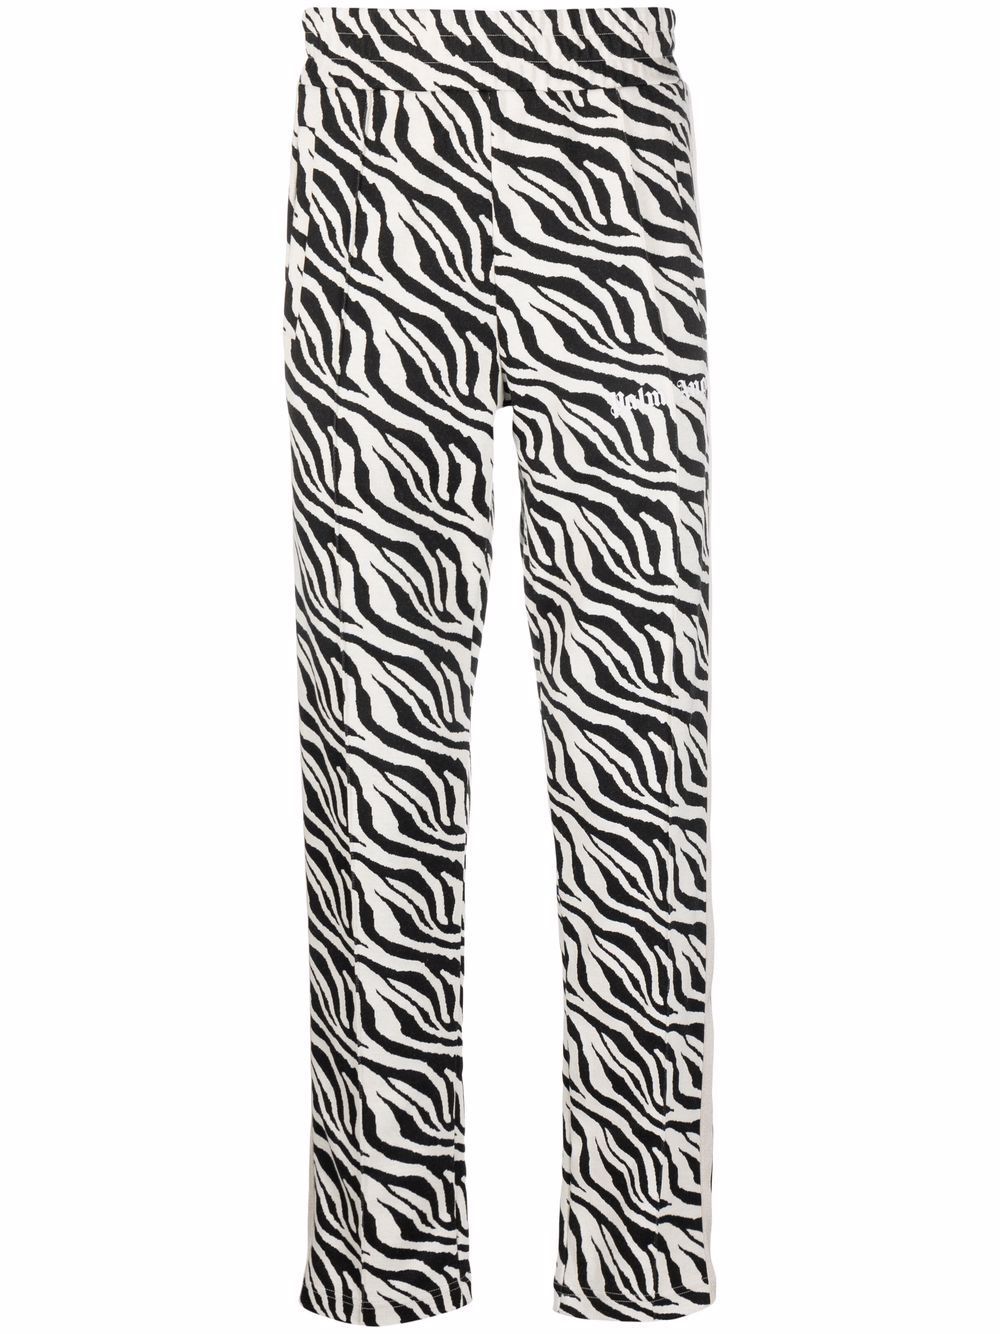 ZEBRA TRACK PANTS in black - Palm Angels® Official